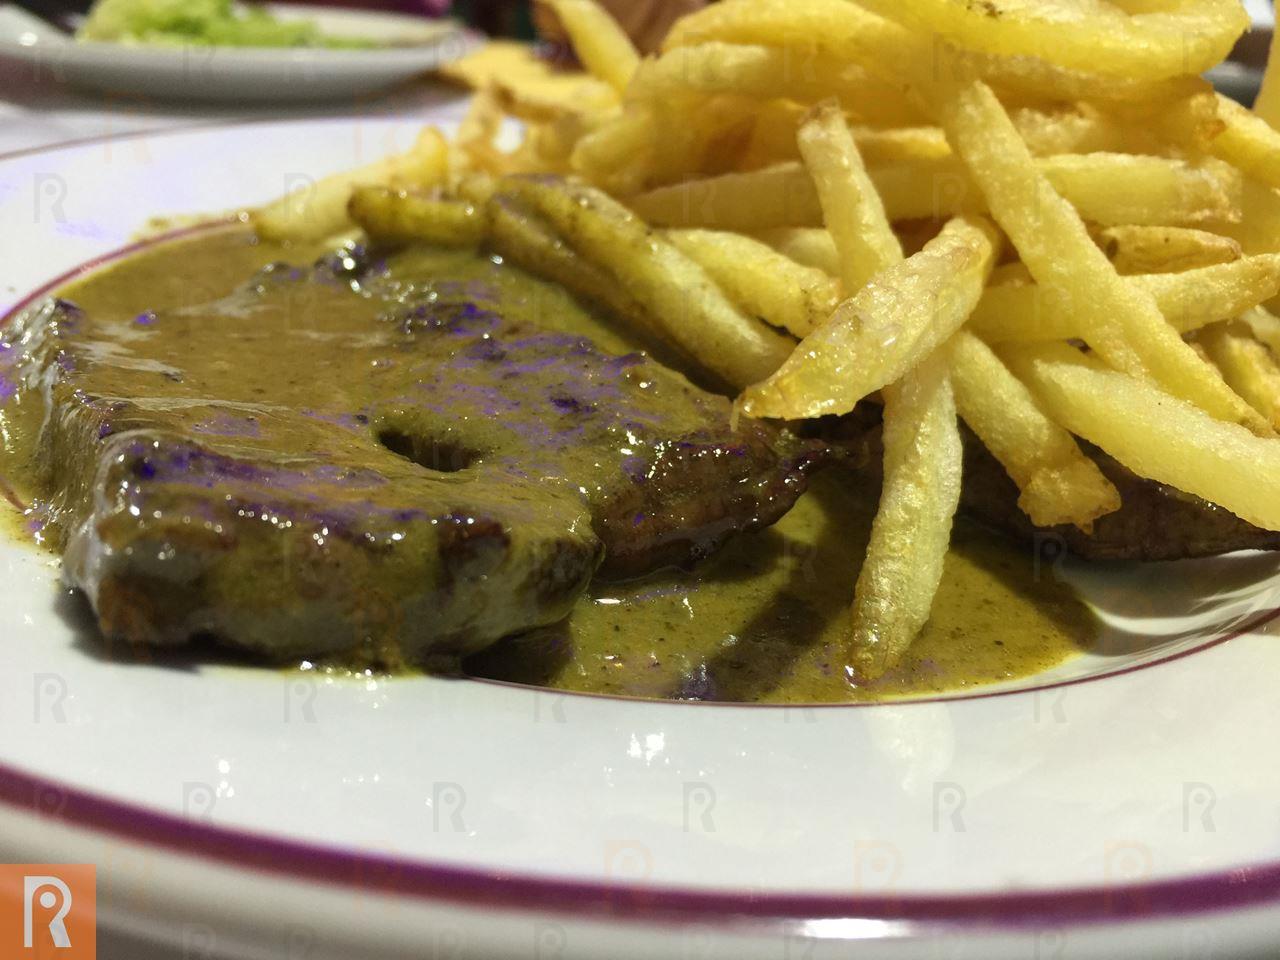 Our Experience at Entrecote Restaurant in The Avenues